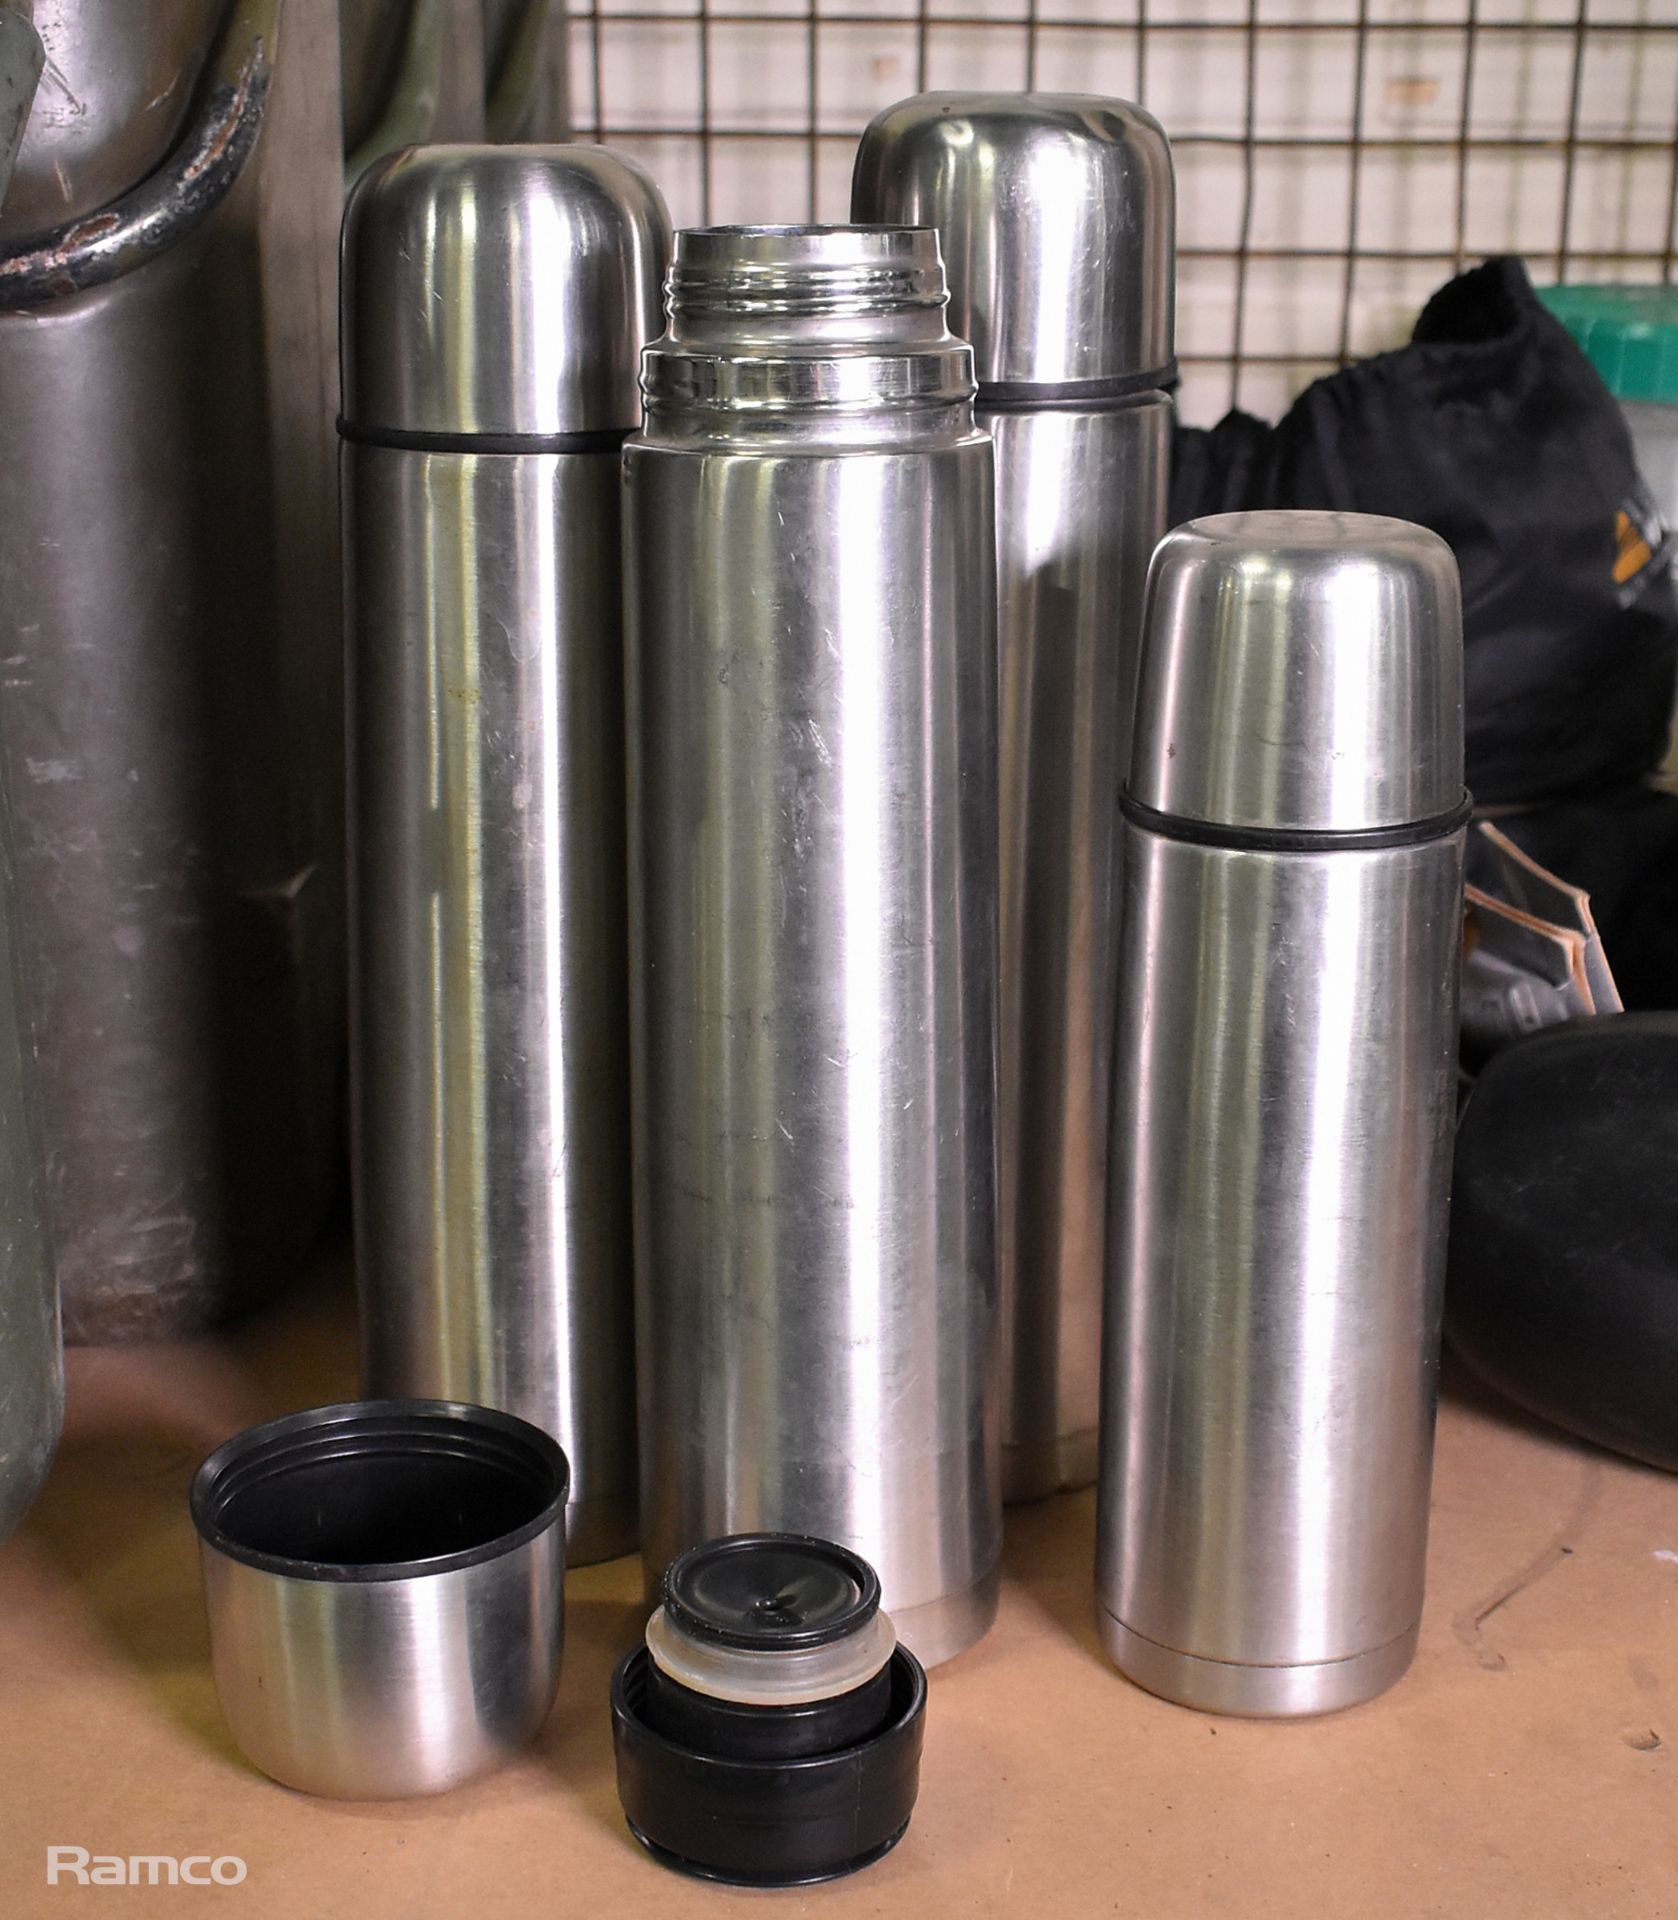 Camping accessories - Norwegian food containers, stainless steel flasks, cooking pots - Image 4 of 7